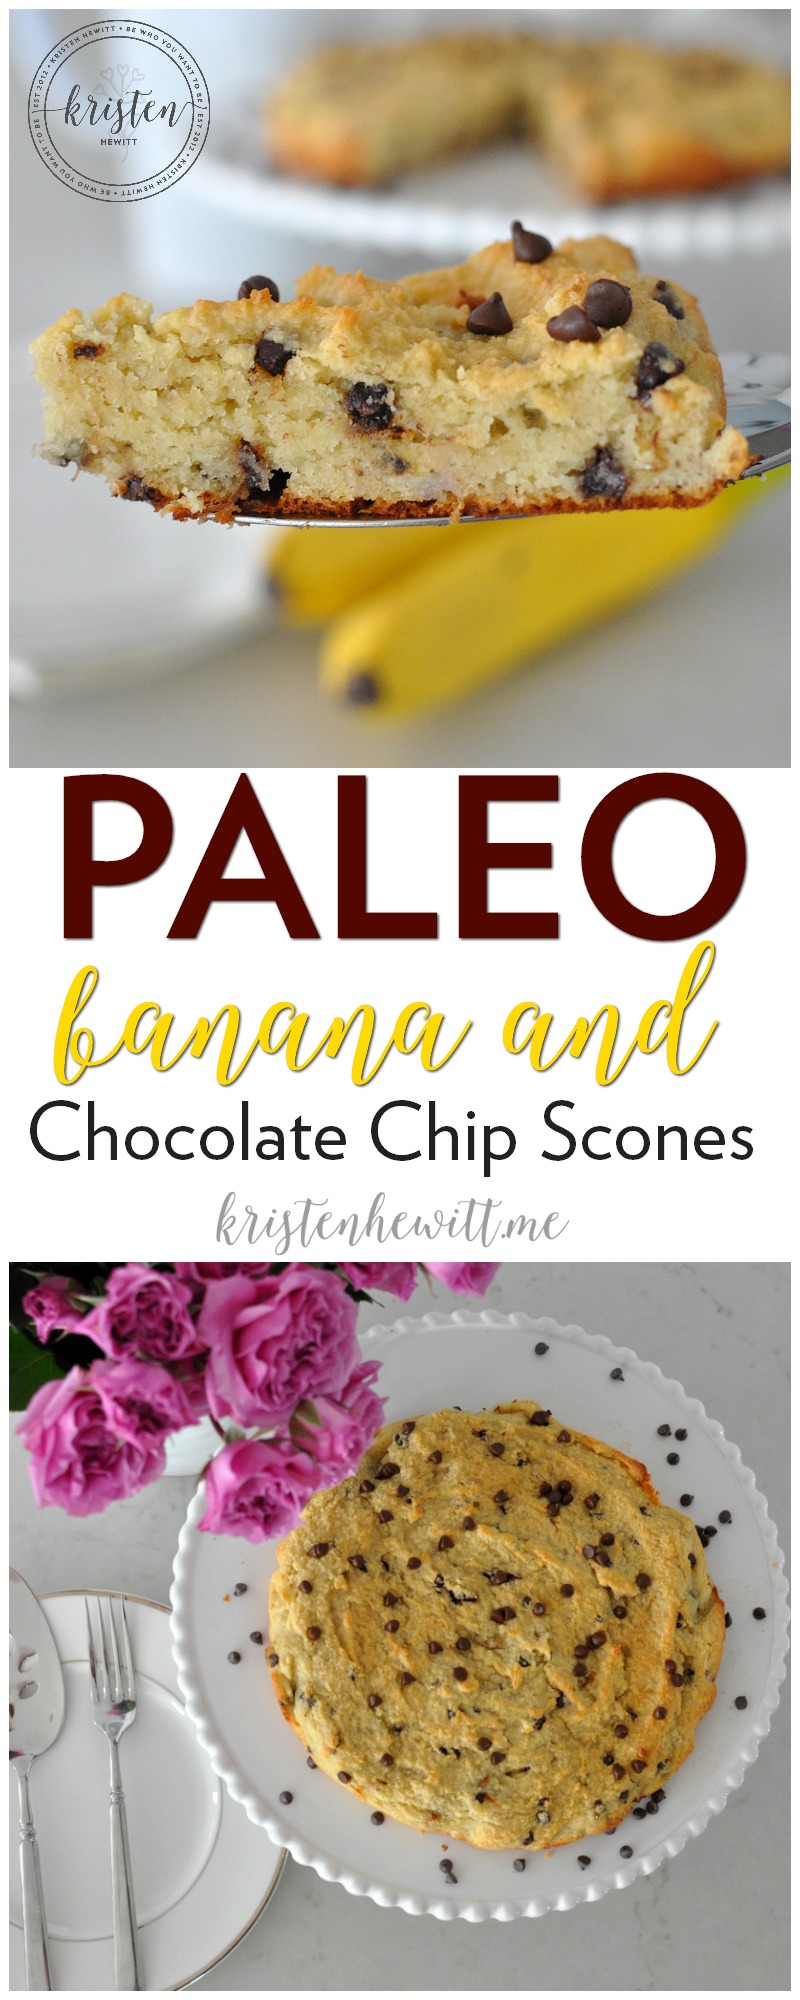 Looking for a new paleo scones recipe? Try these paleo banana chocolate chip scones. They are so easy to make and a delicious treat for breakfast!